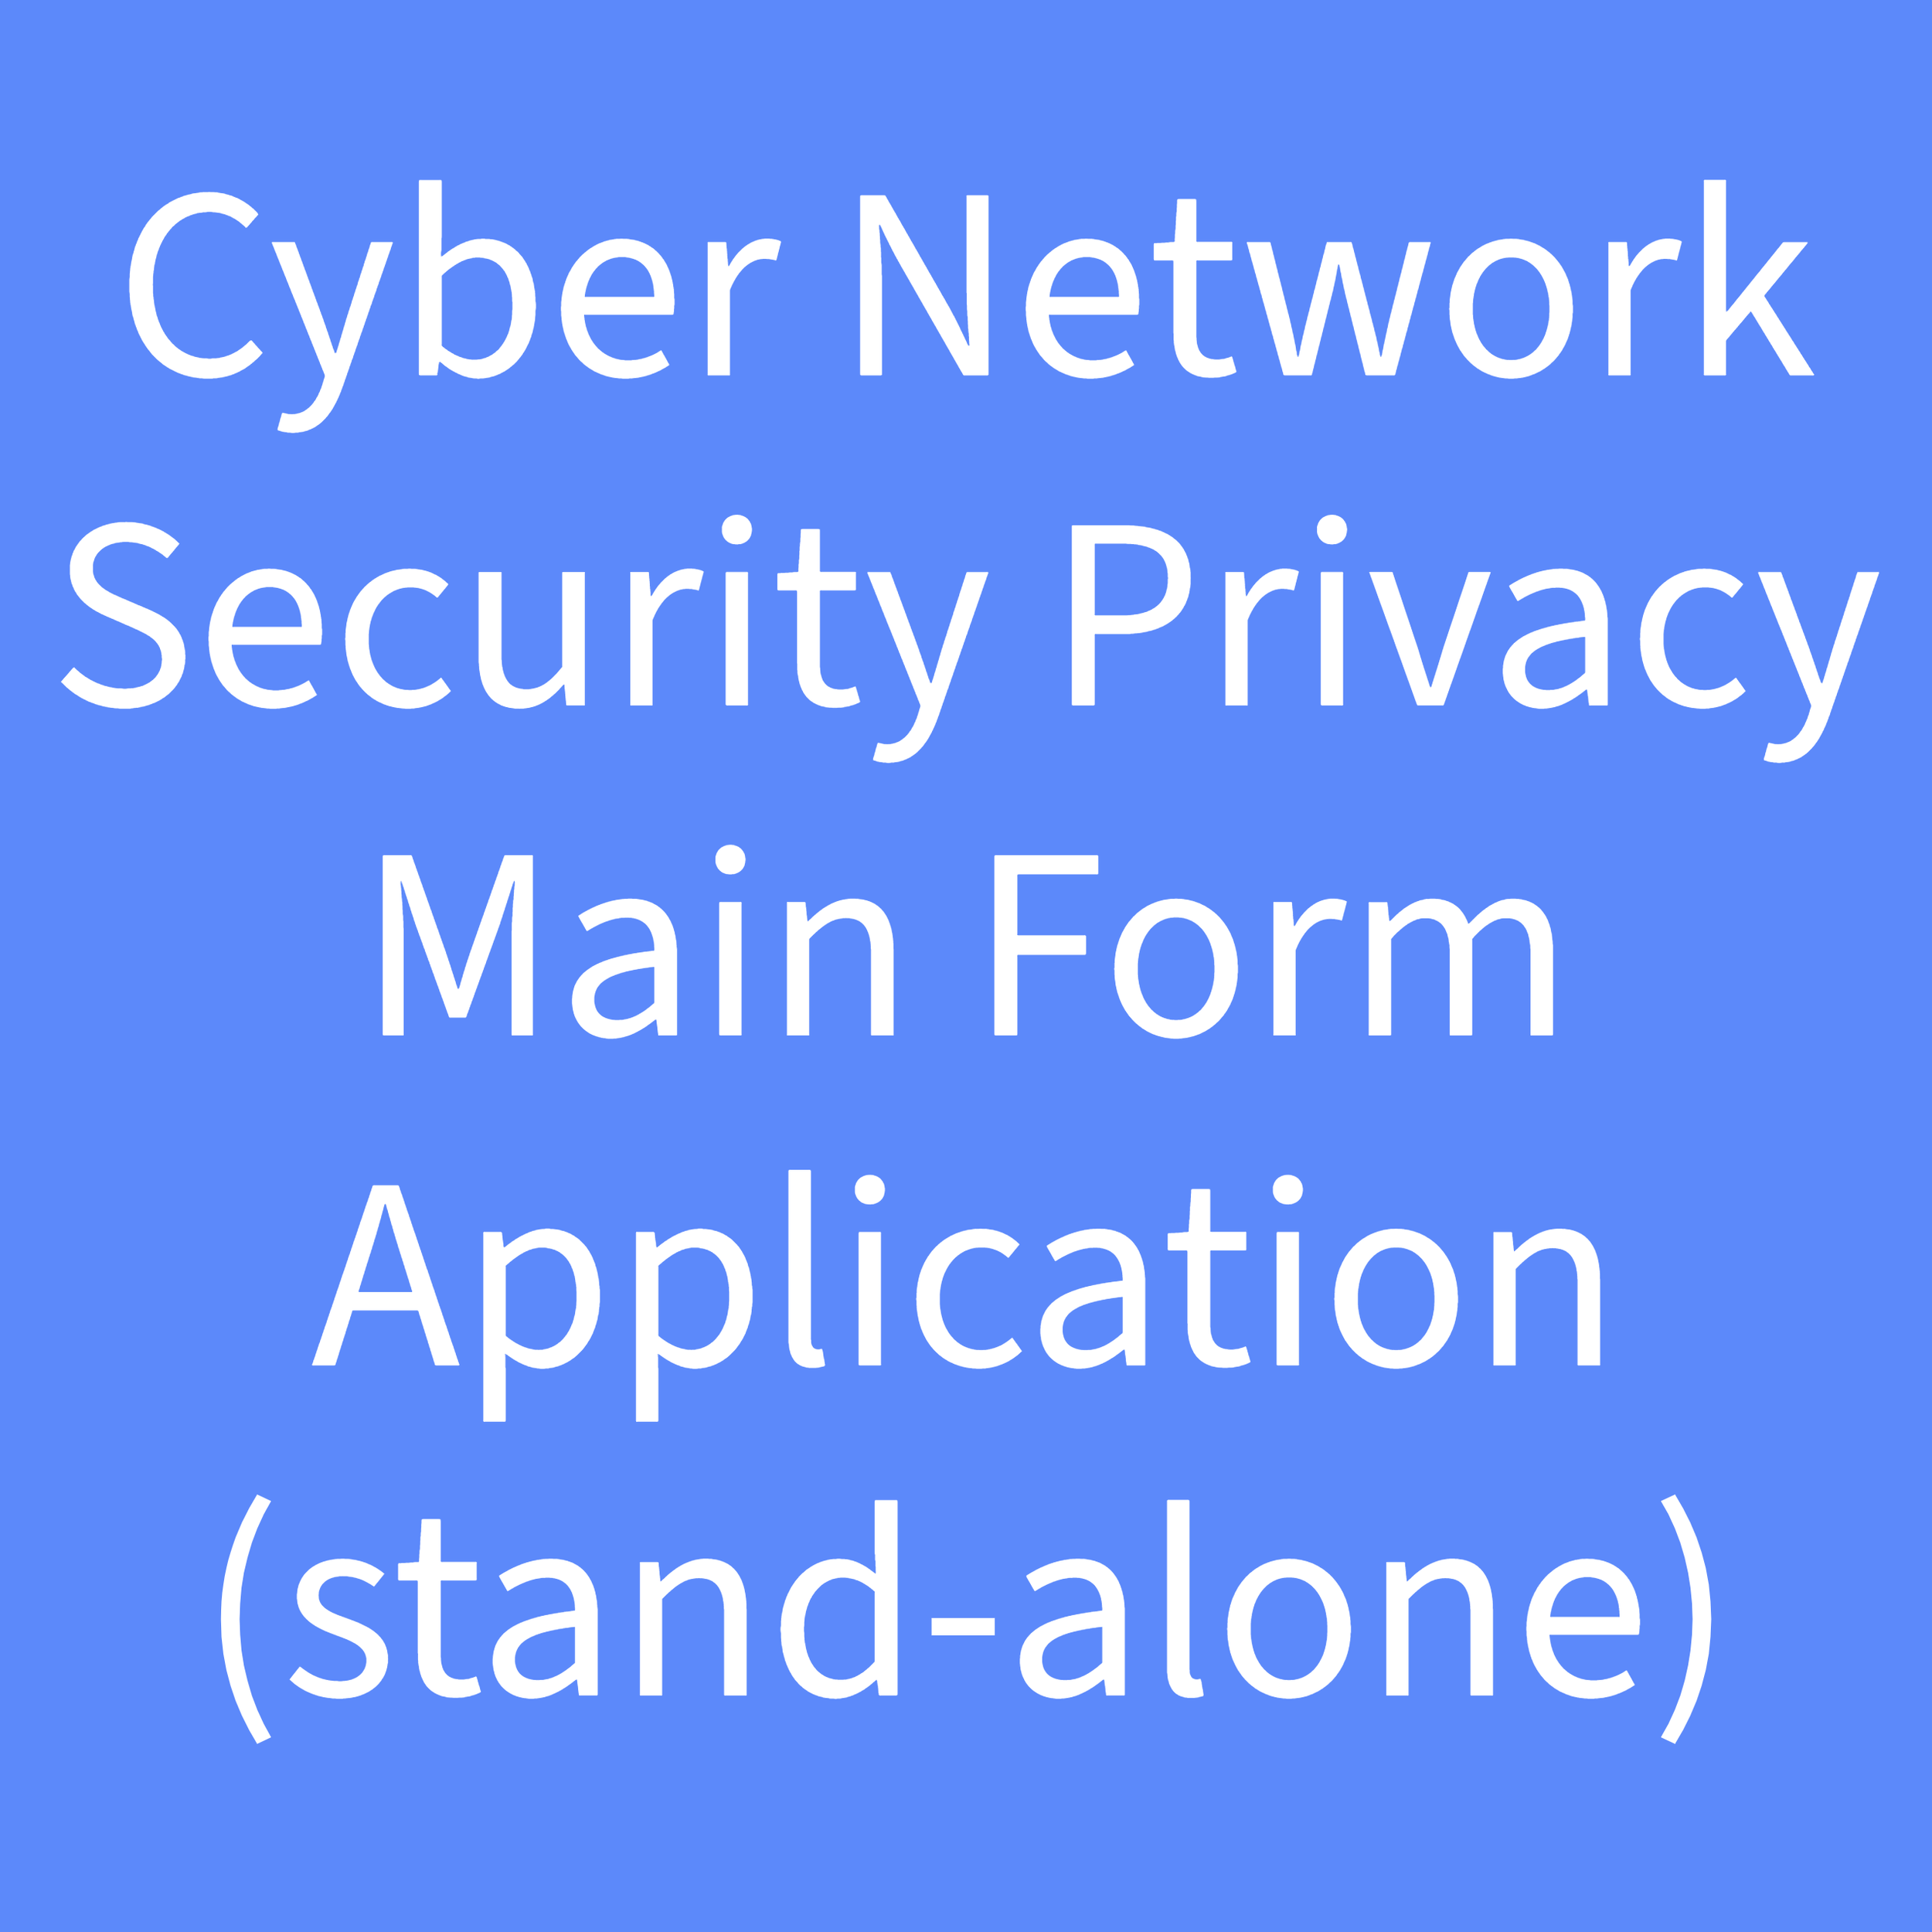 Cyber-Network Security & Privacy Liability & Technology Risks-3-Cyber Network Security Privacy Main Form App.png